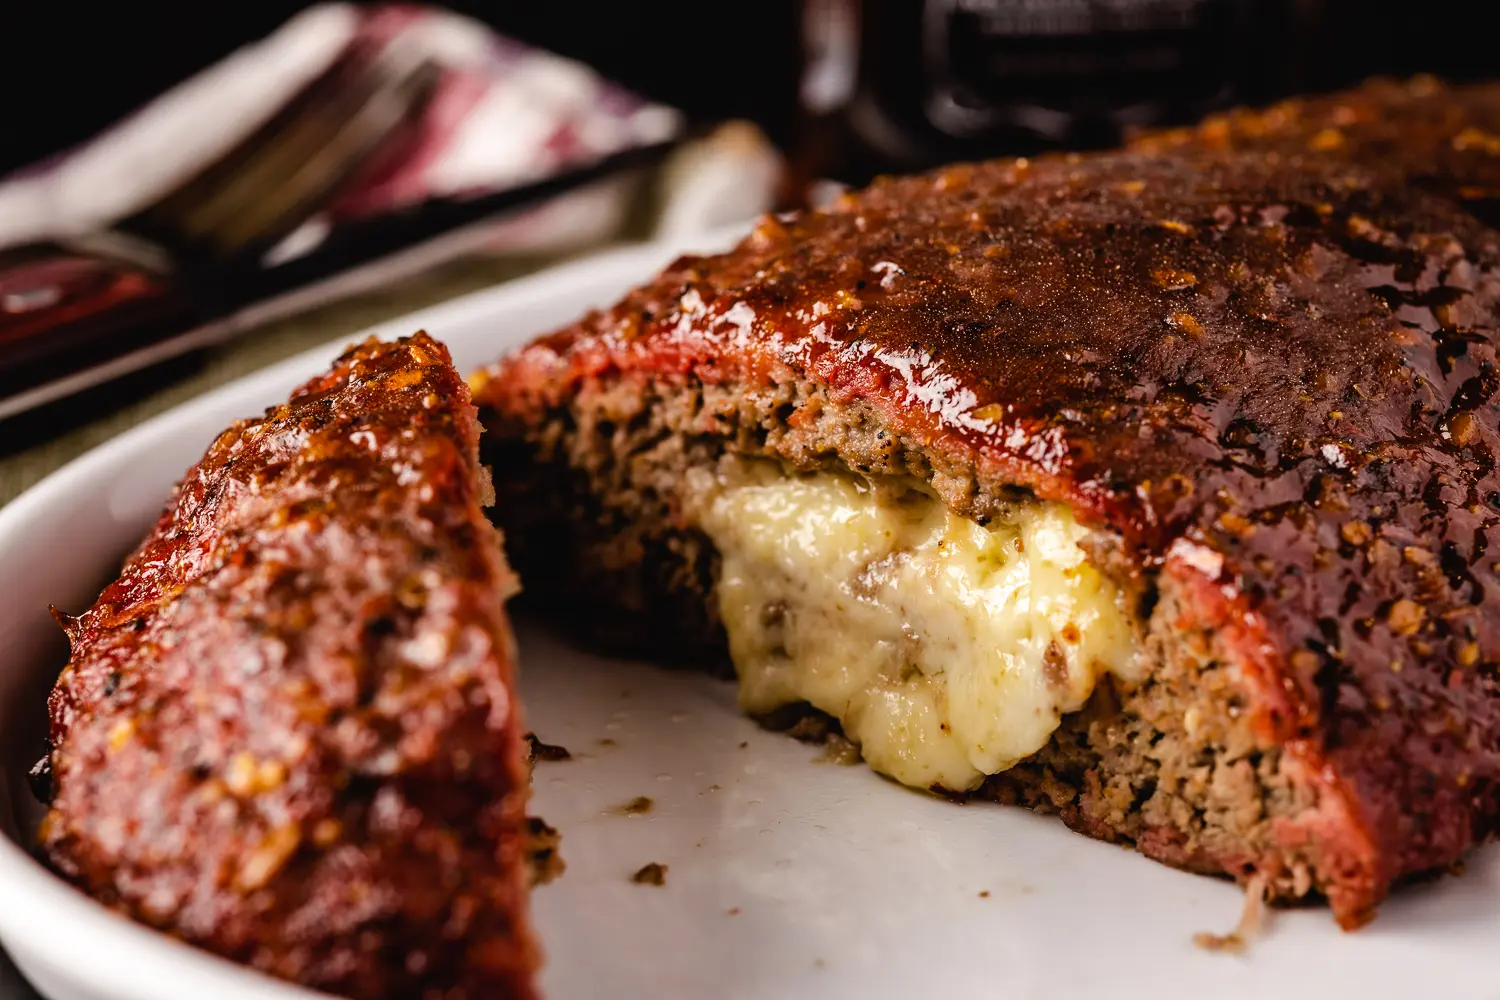 meatloaf smoked recipe - What ingredient keeps meatloaf from falling apart